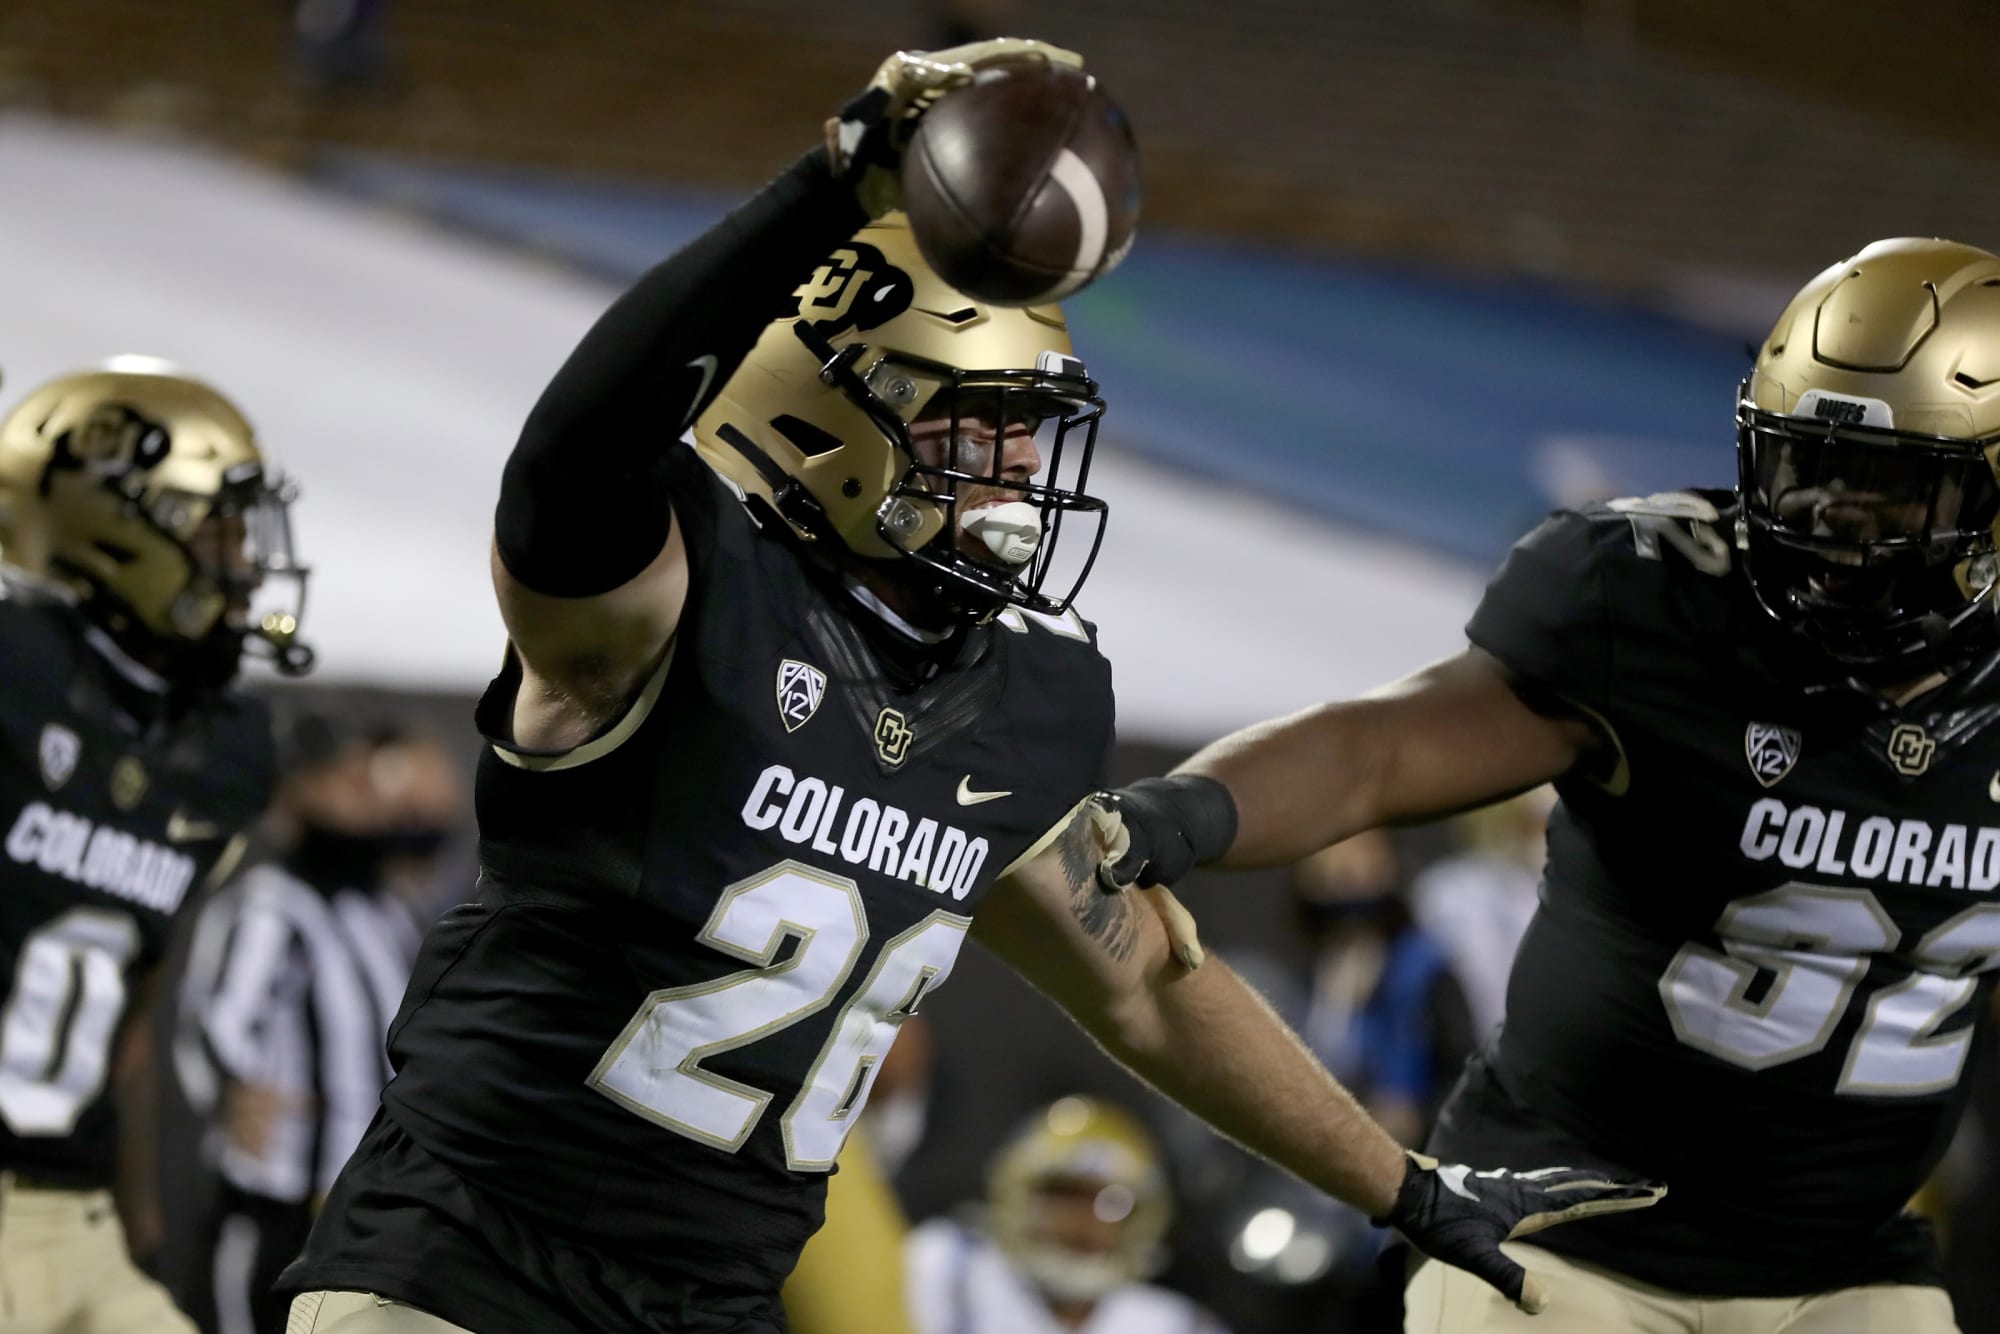 Colorado Football 7 reasons why Colorado would fit well in the Big Ten